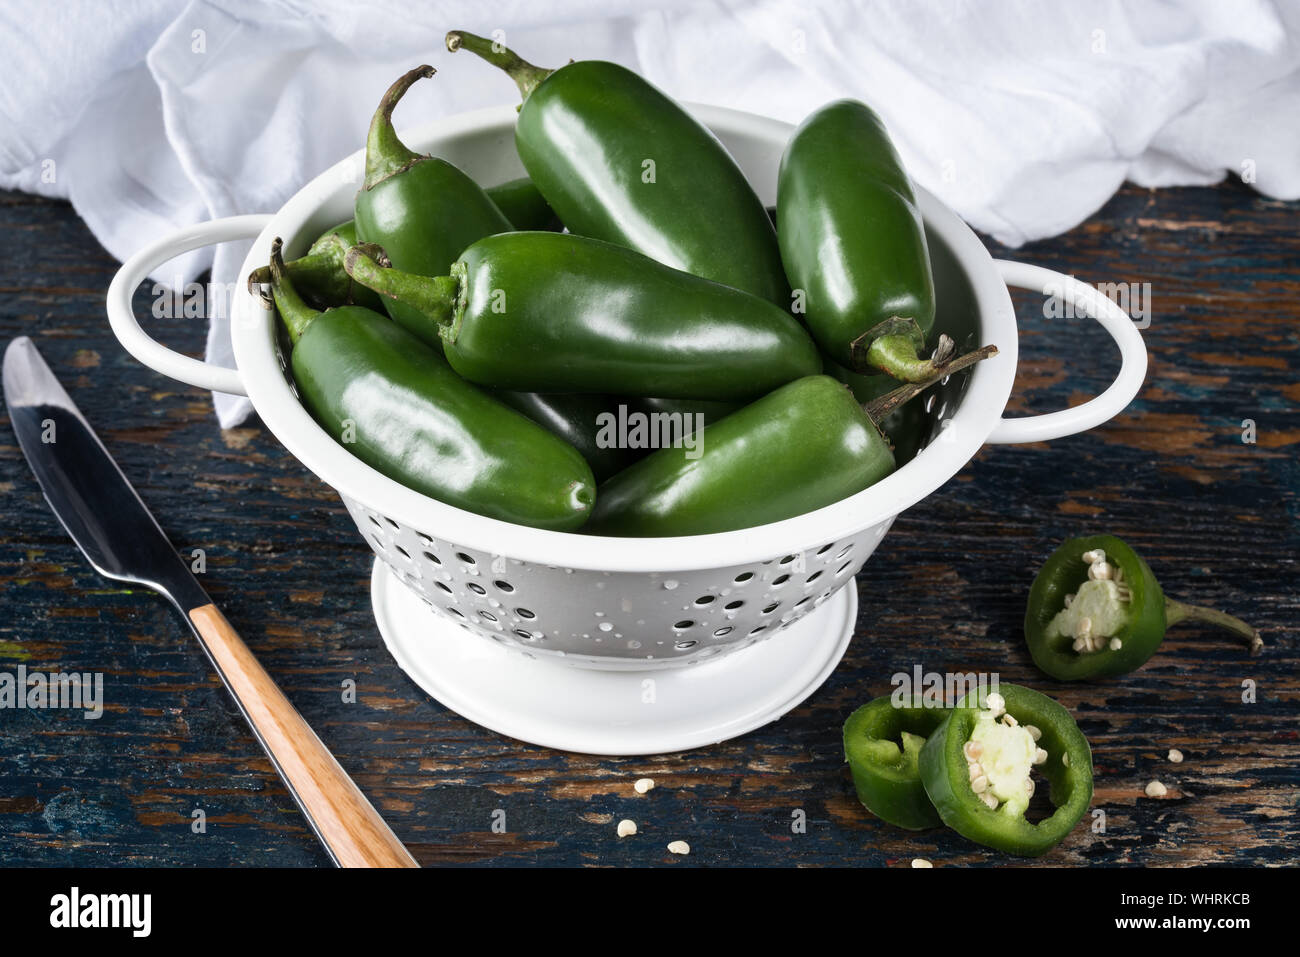 High Angle View Of Jalapeno Peppers Stock Photo